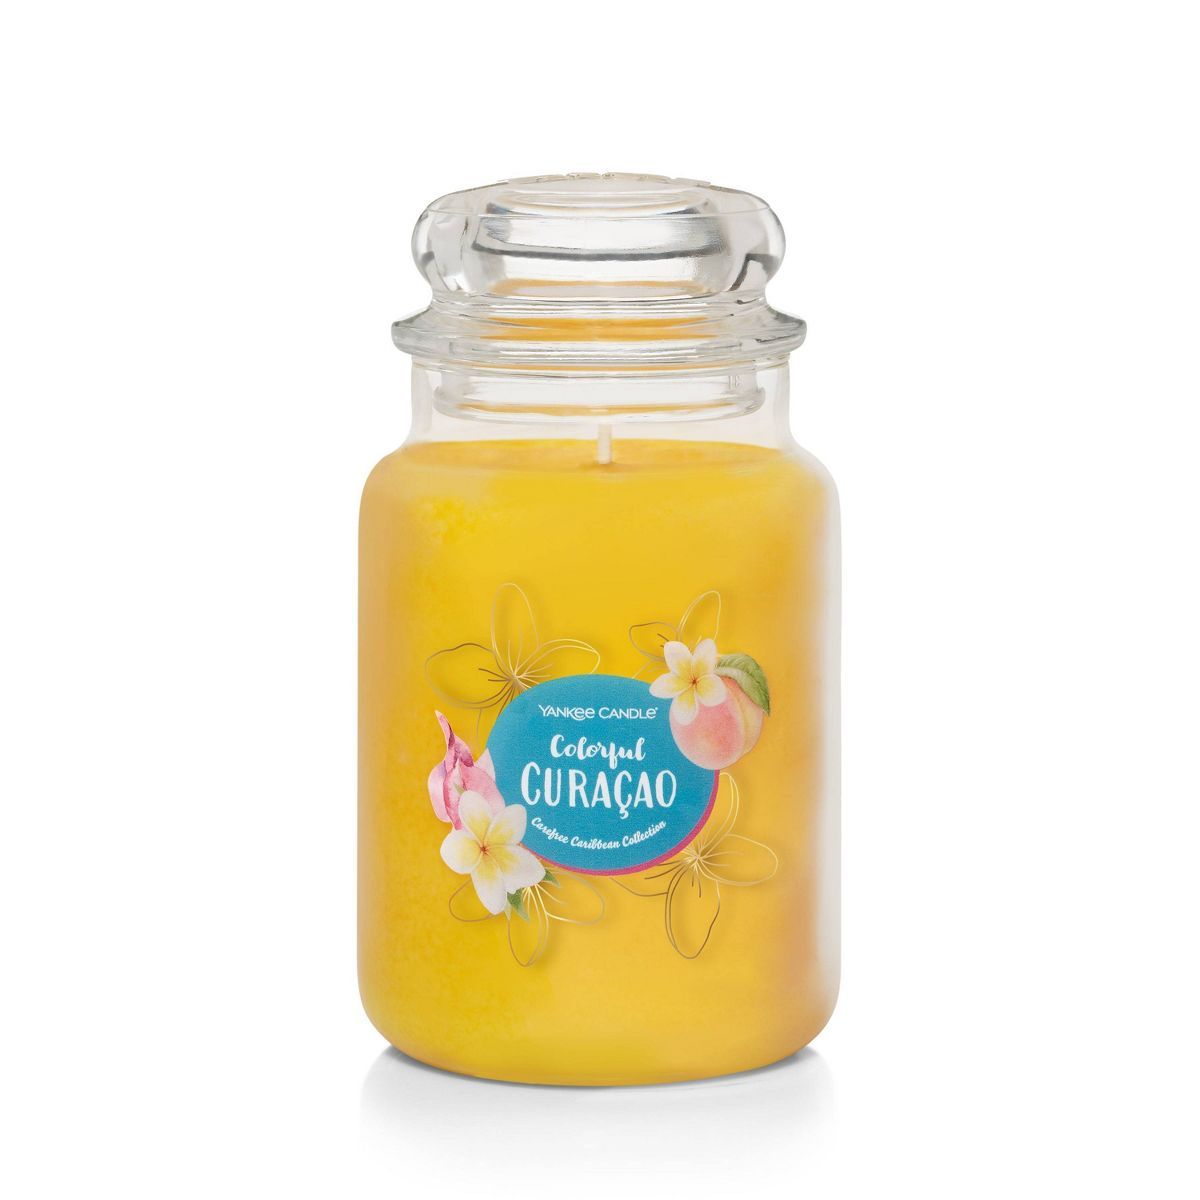 Classic Caribbean 22oz Colorful Curacao - Yankee Candle | Target